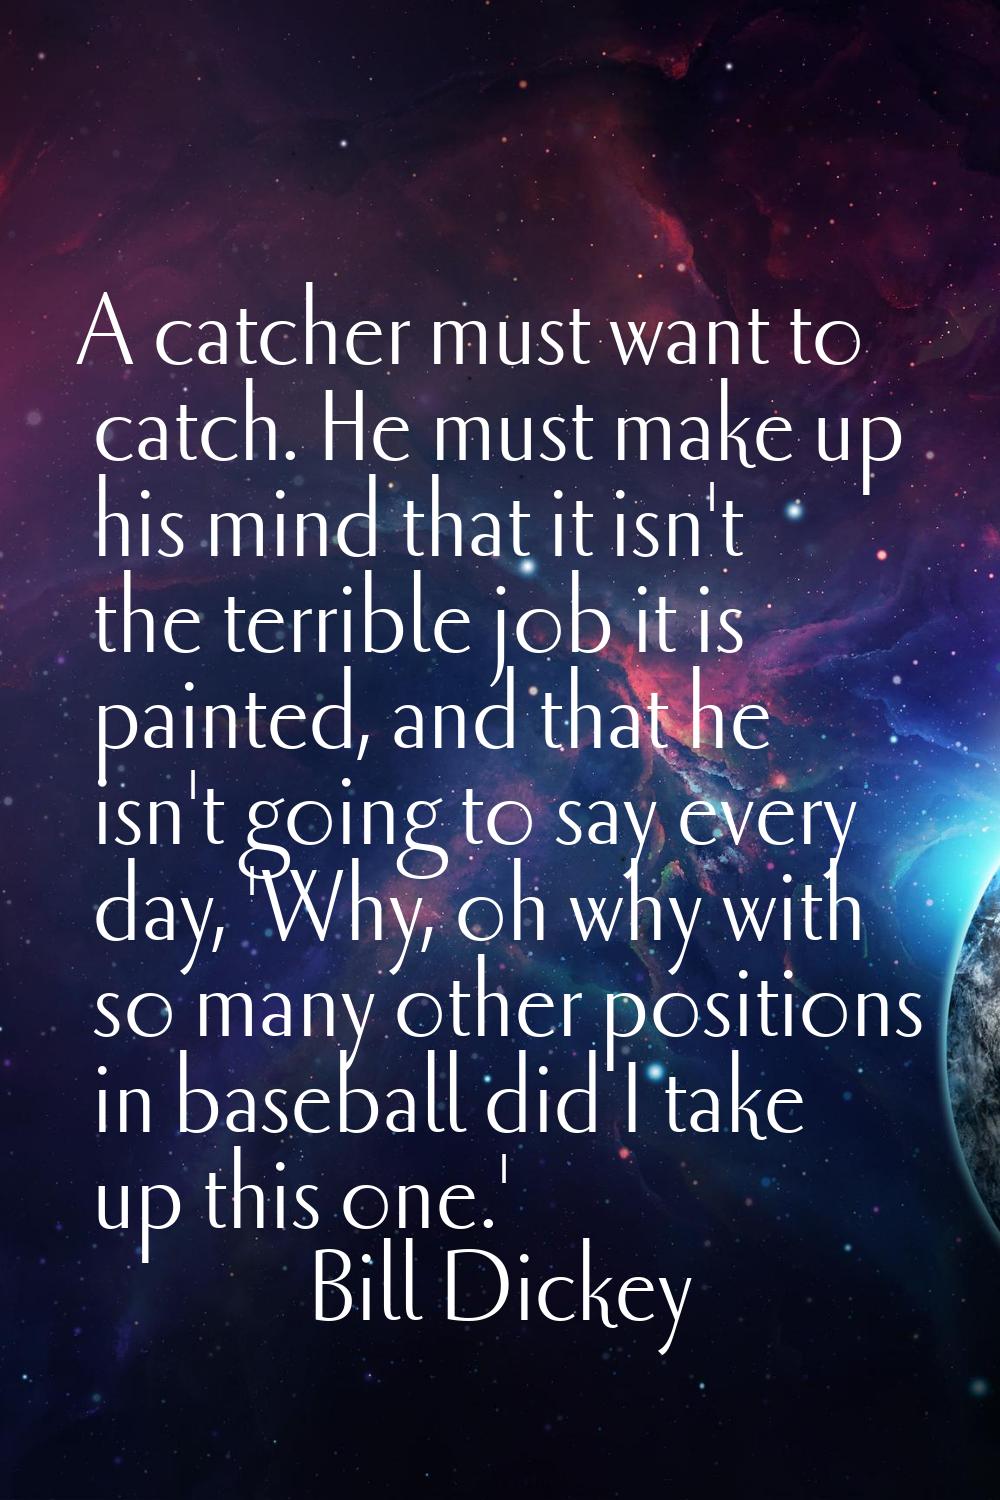 A catcher must want to catch. He must make up his mind that it isn't the terrible job it is painted